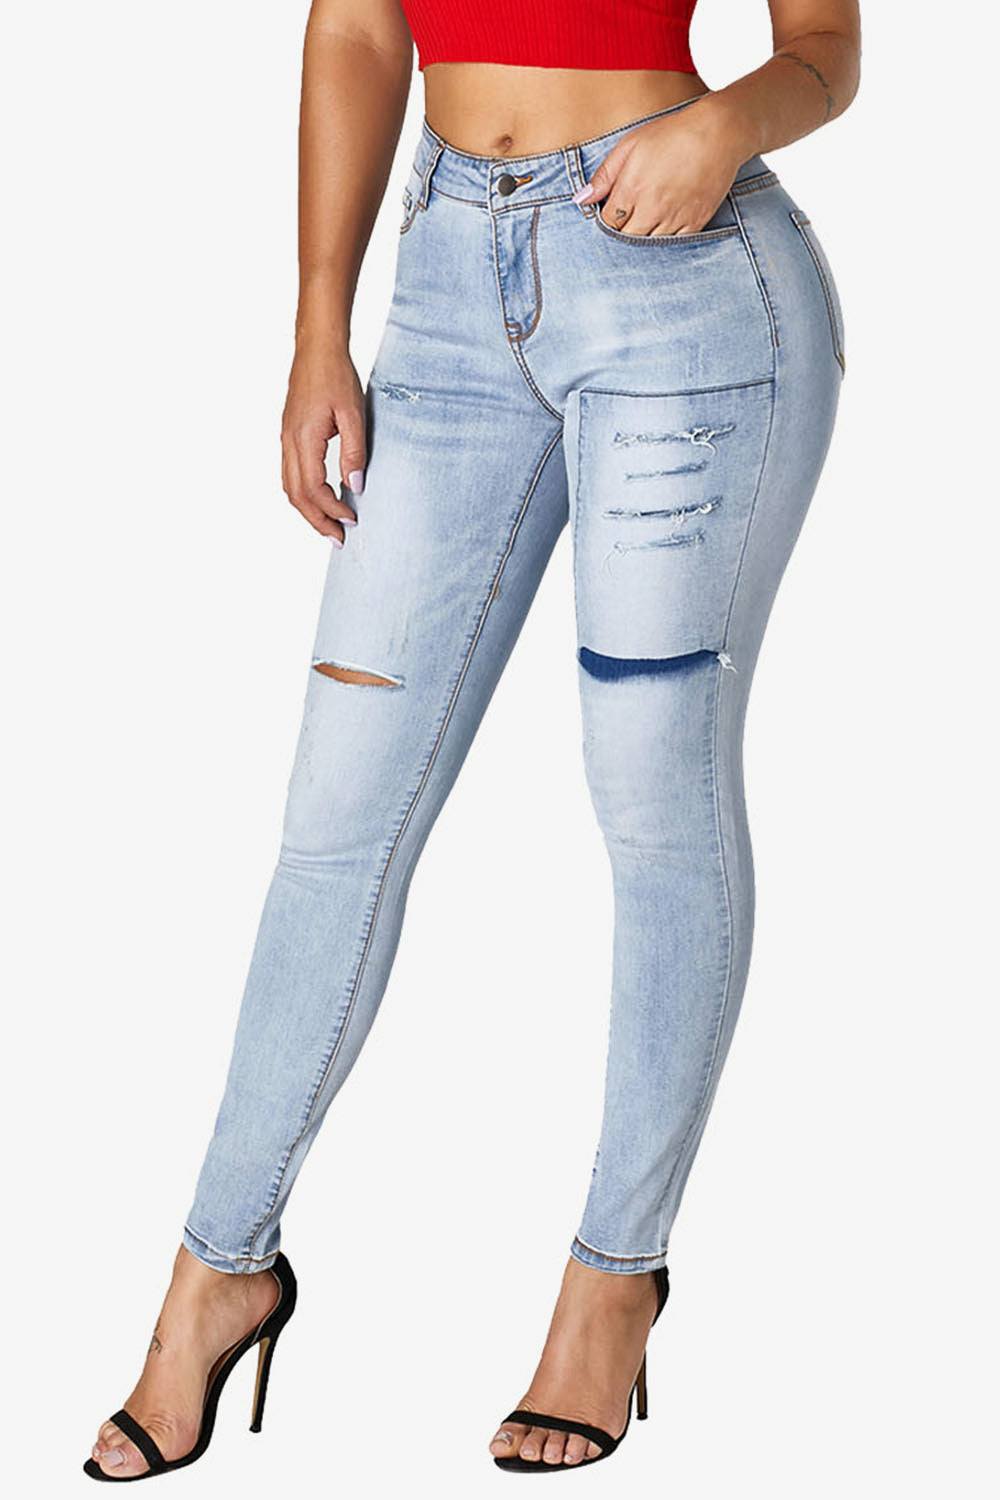 Jeans:  Acid Wash Ripped Skinny Jeans